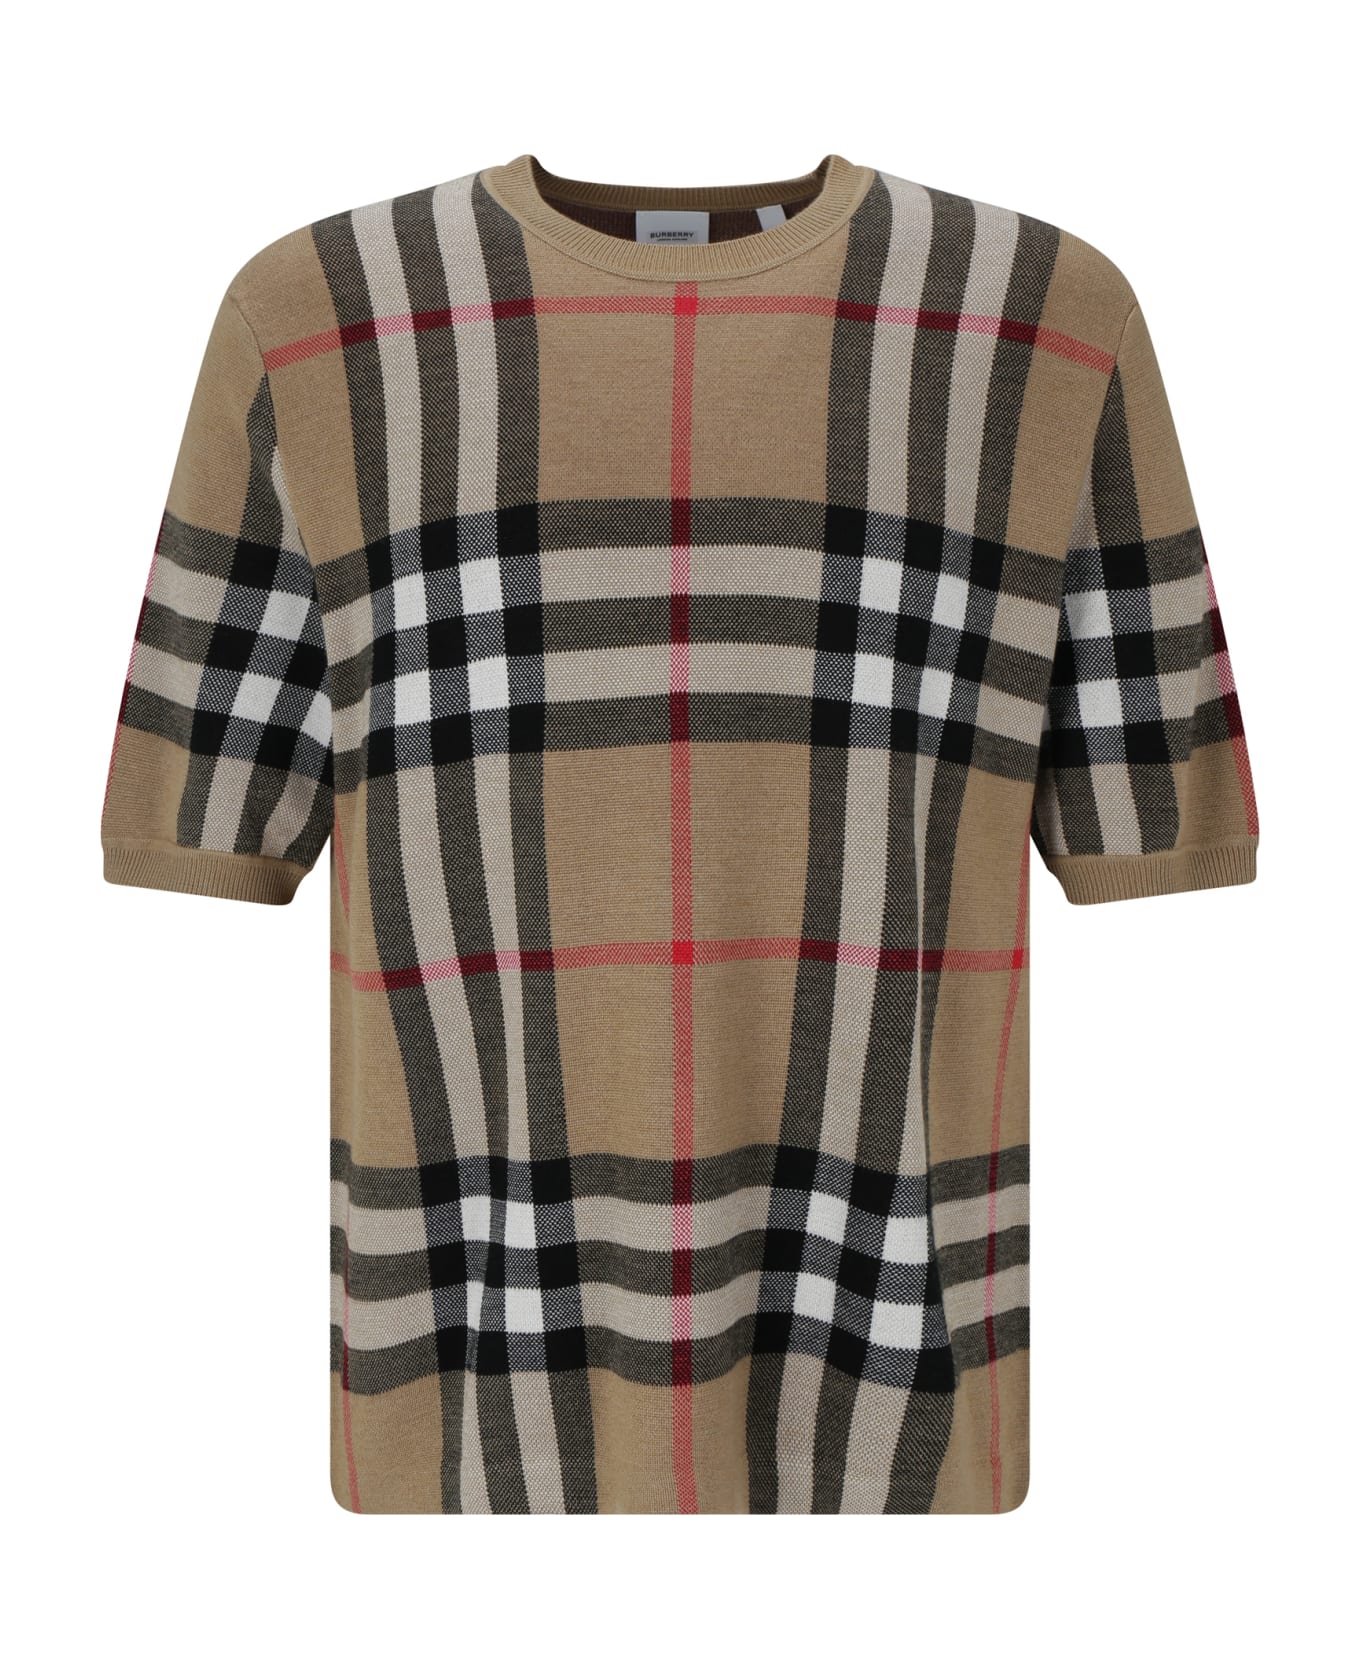 Burberry Wool T-shirt With Vintage Check Print - Beige シャツ